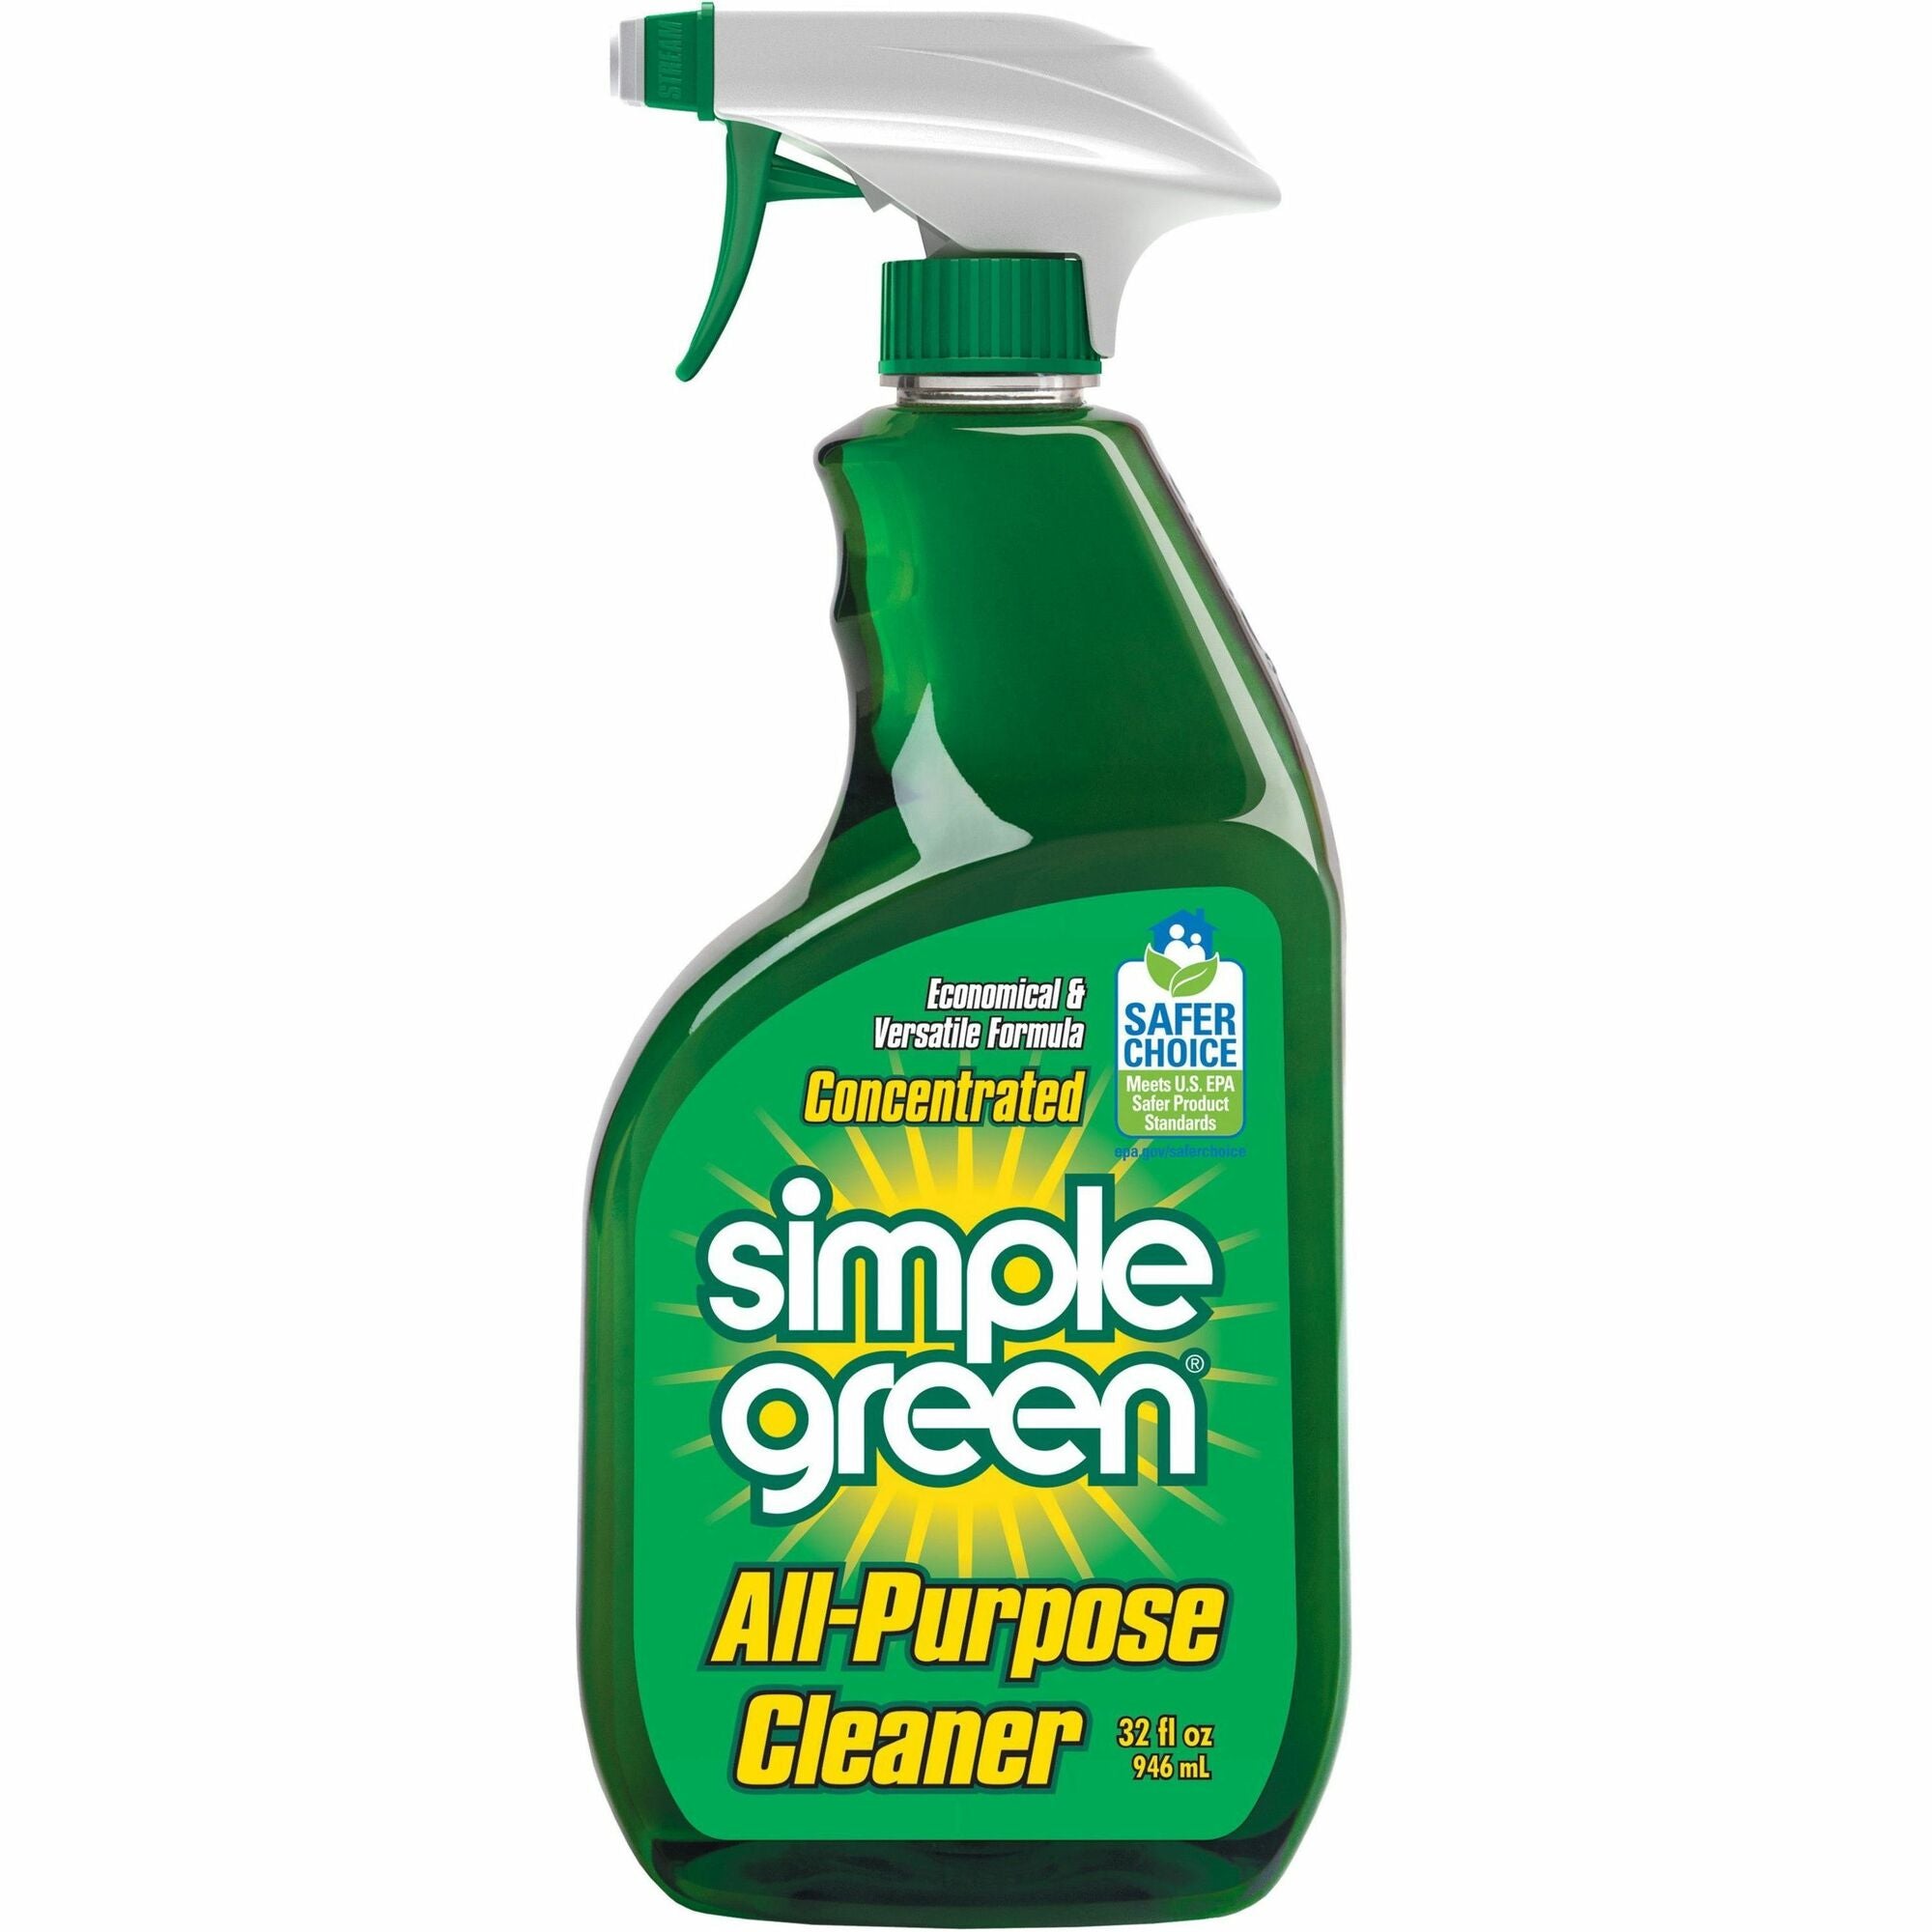 simple-green-all-purpose-concentrated-cleaner-concentrate-32-fl-oz-1-quart-1-each-non-toxic-streak-free-smudge-free-green_smp13033 - 1